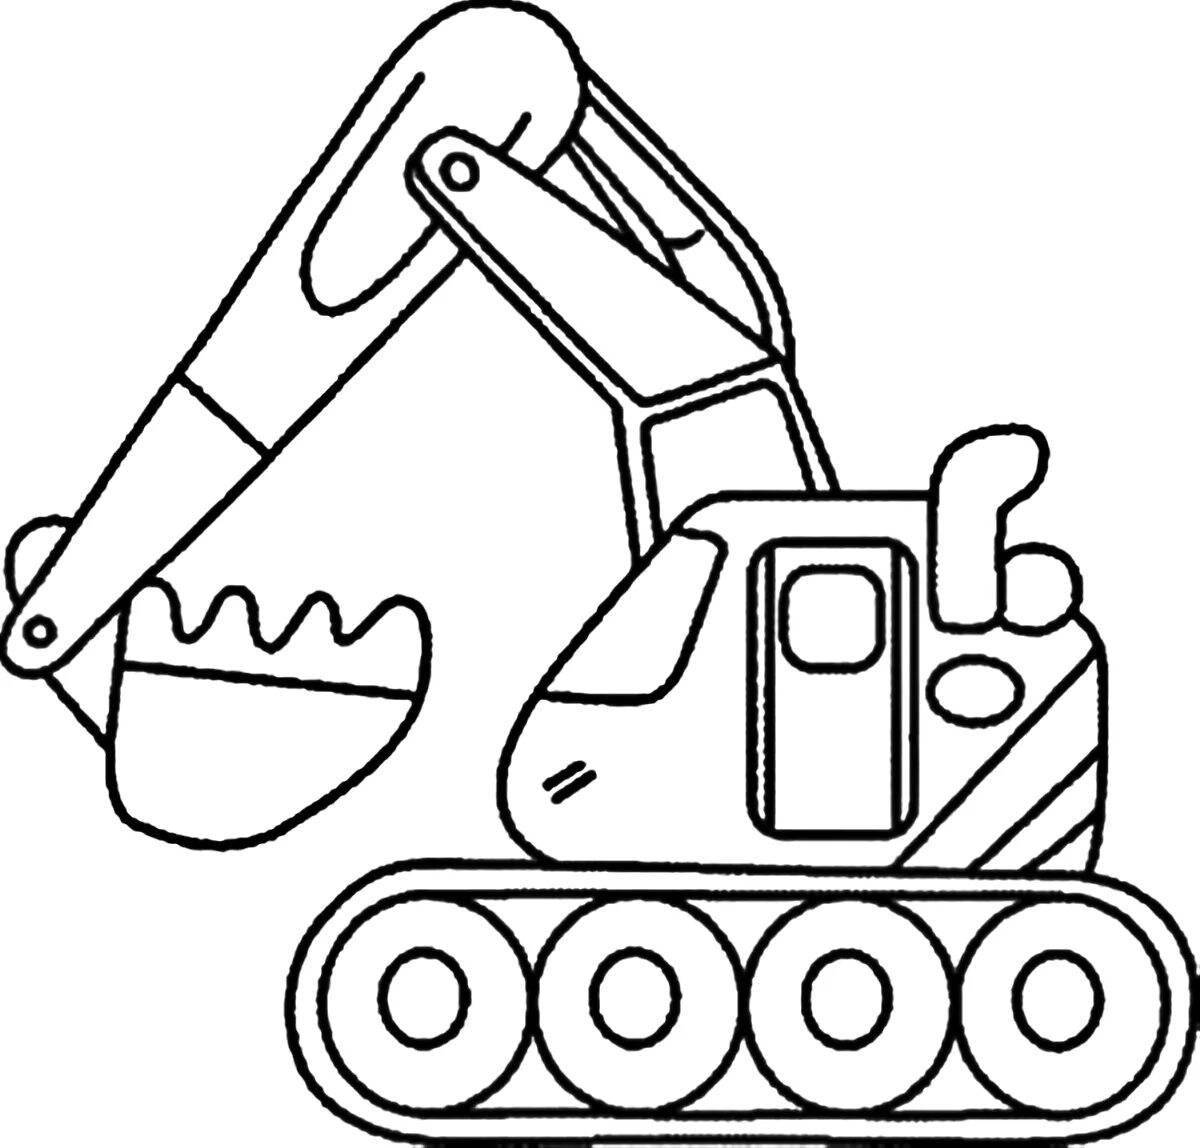 Construction equipment for children 3 4 years old #1